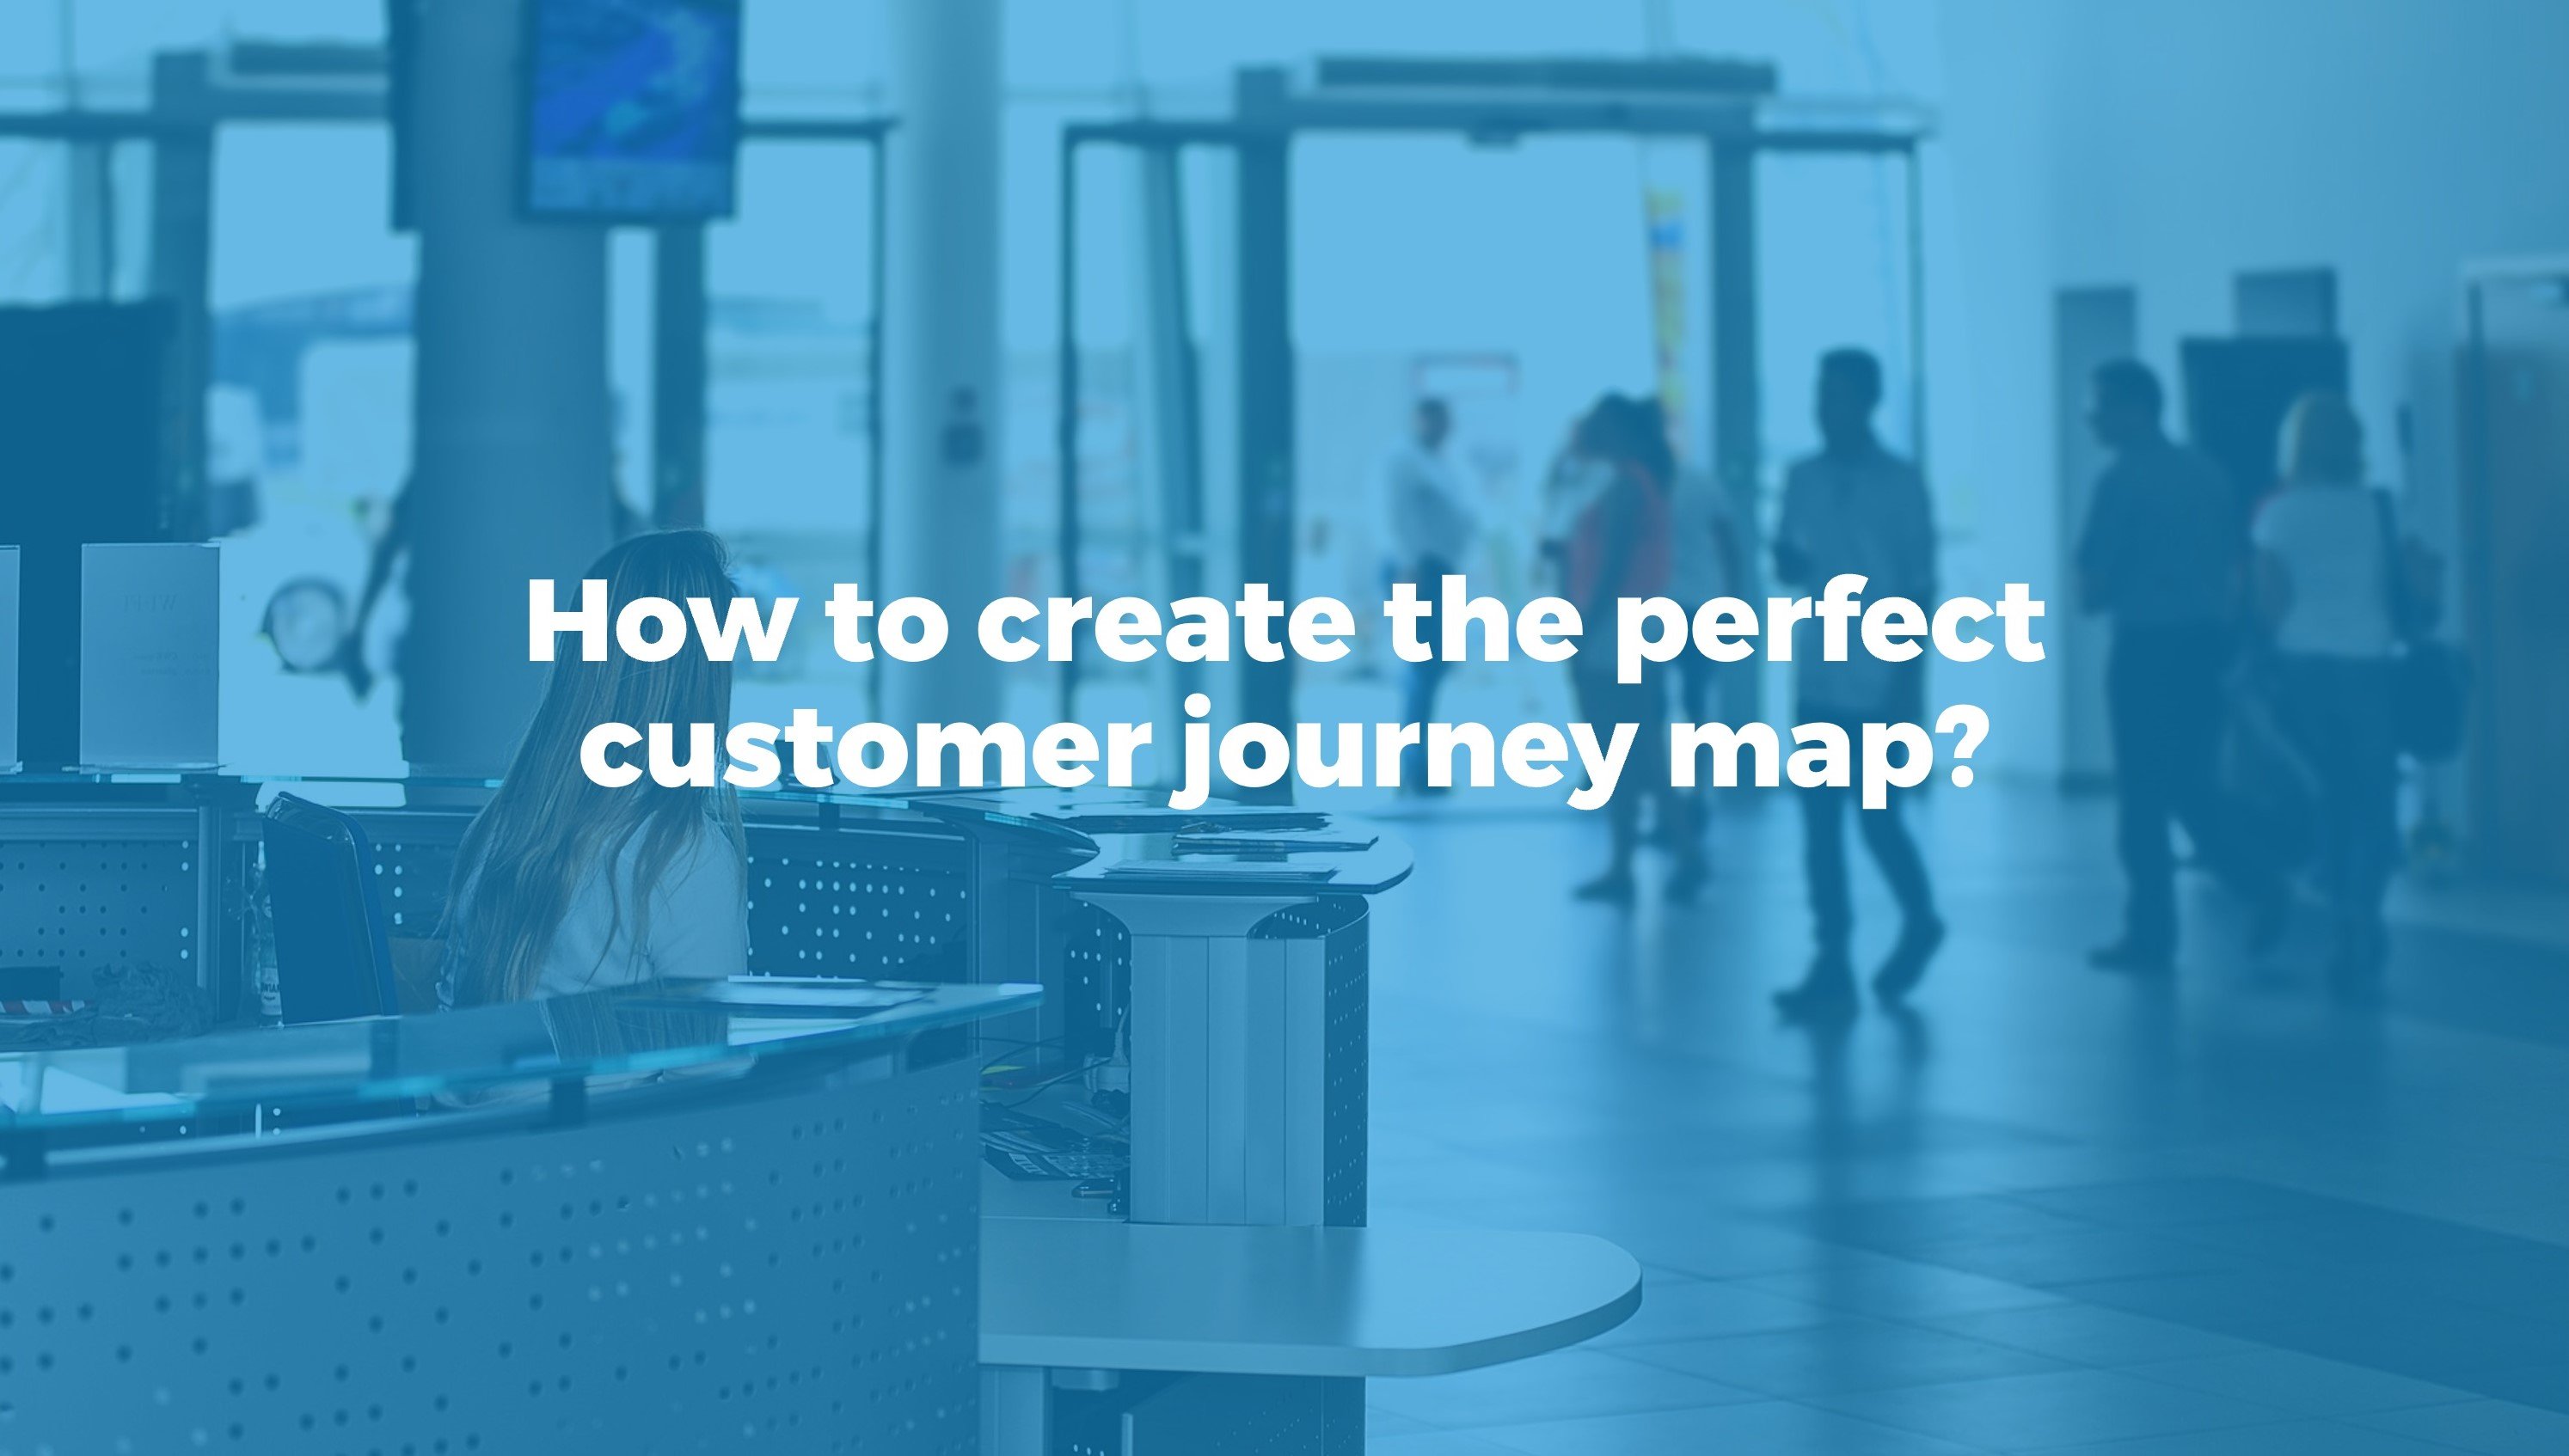 5 tips to create the ideal customer journey map